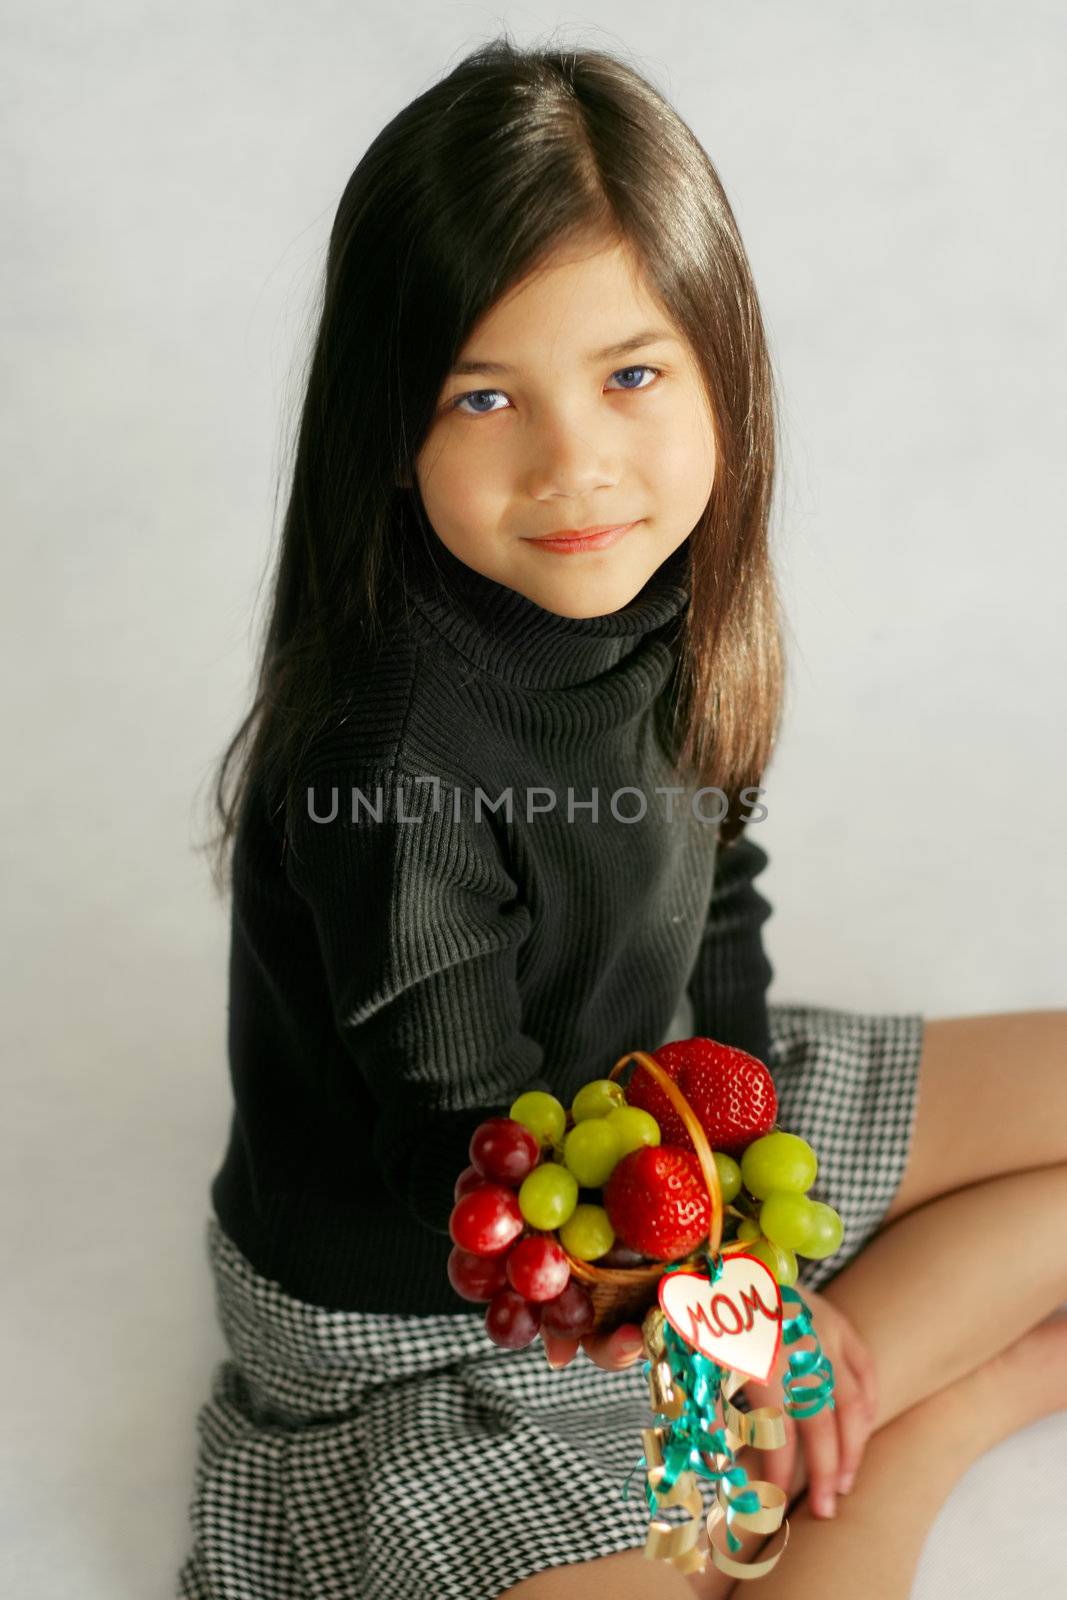 Child holding small fruit basket for mom by jarenwicklund